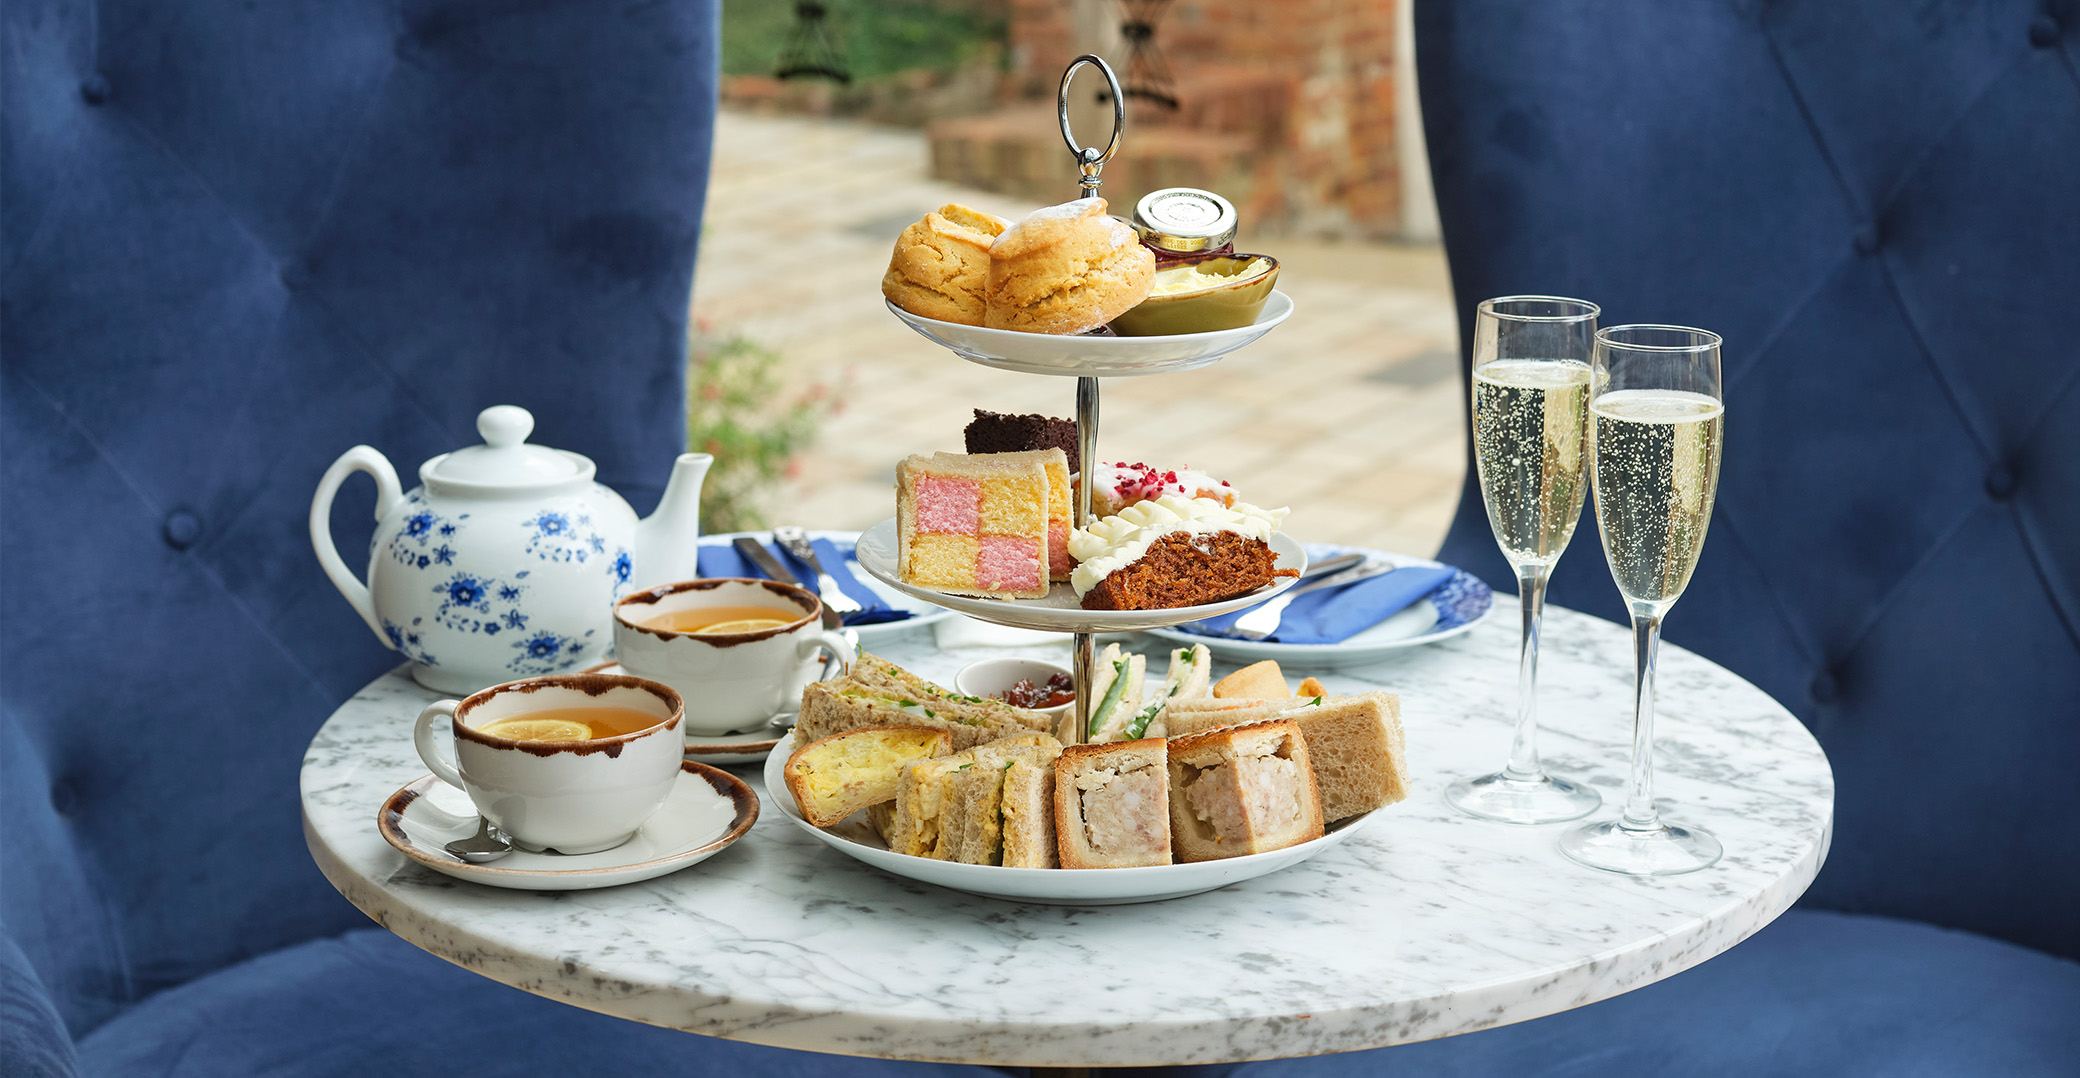 Afternoon Tea At The Coach House Kitchen - Hatfield House